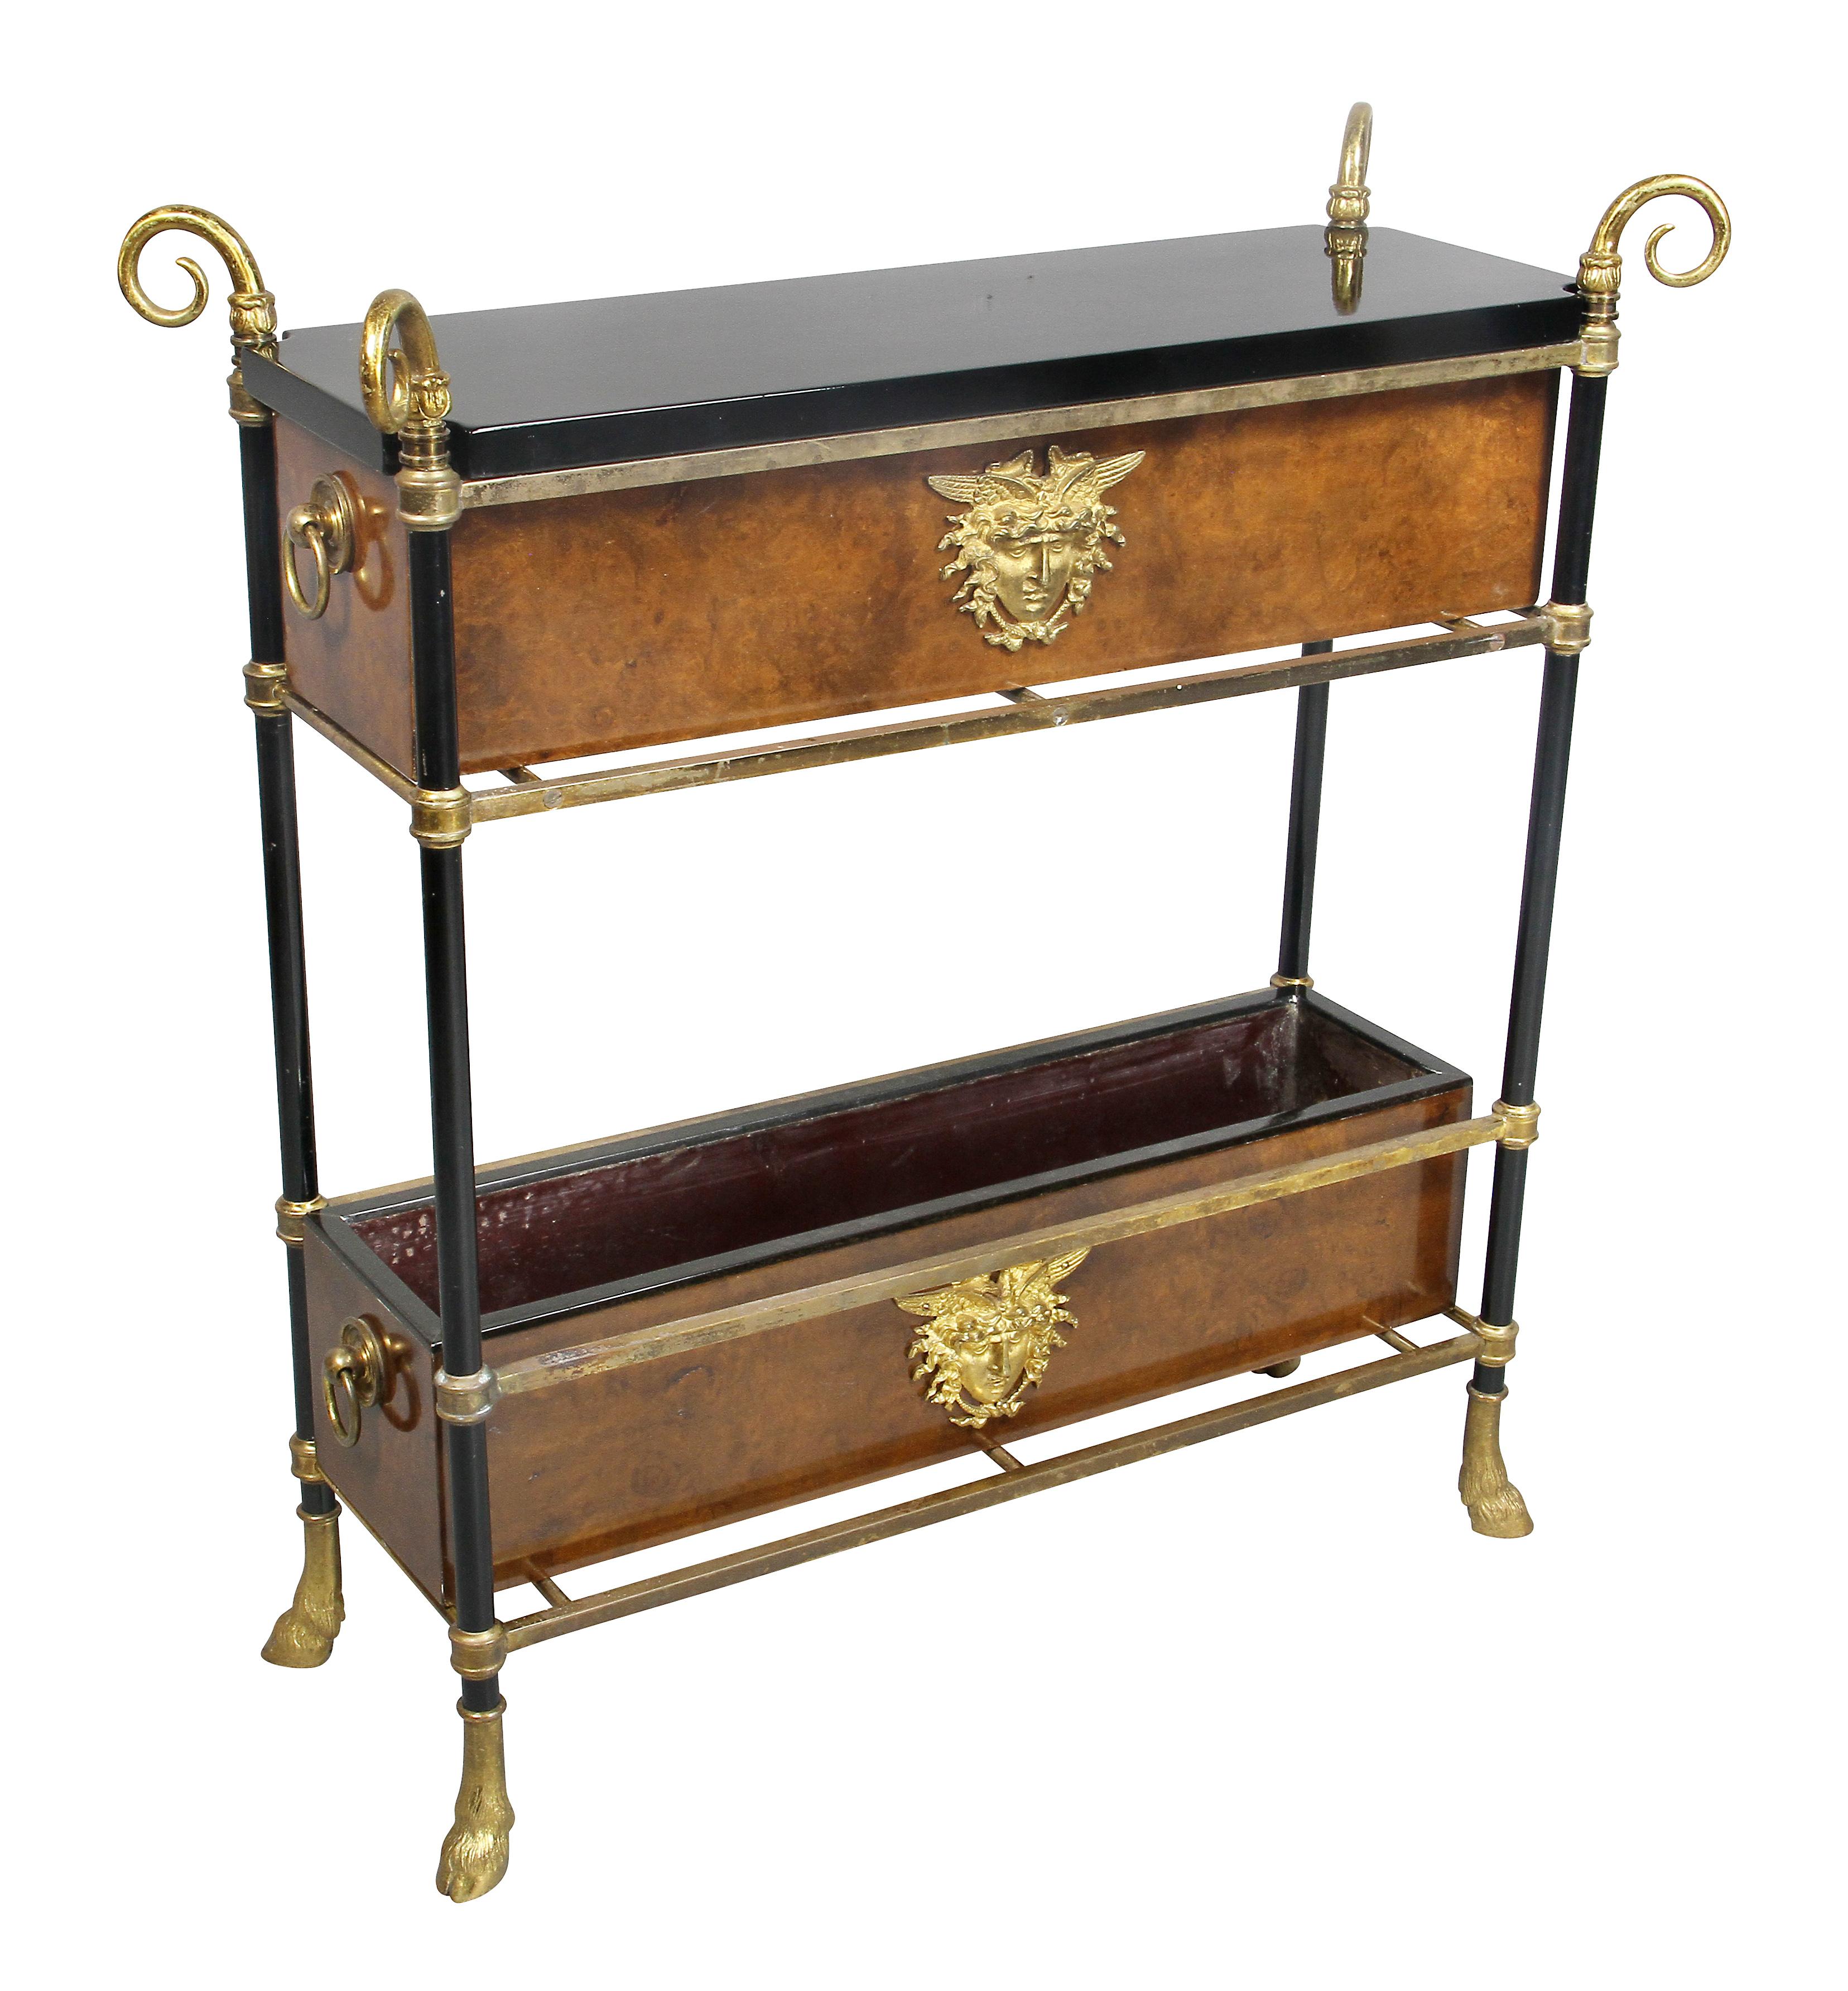 With a removable black lacquer top in a frame with scrolled brass finials opening to a compartment, the face with burl wood and applied gilt metal mask, conforming lower open tray, hoof feet.